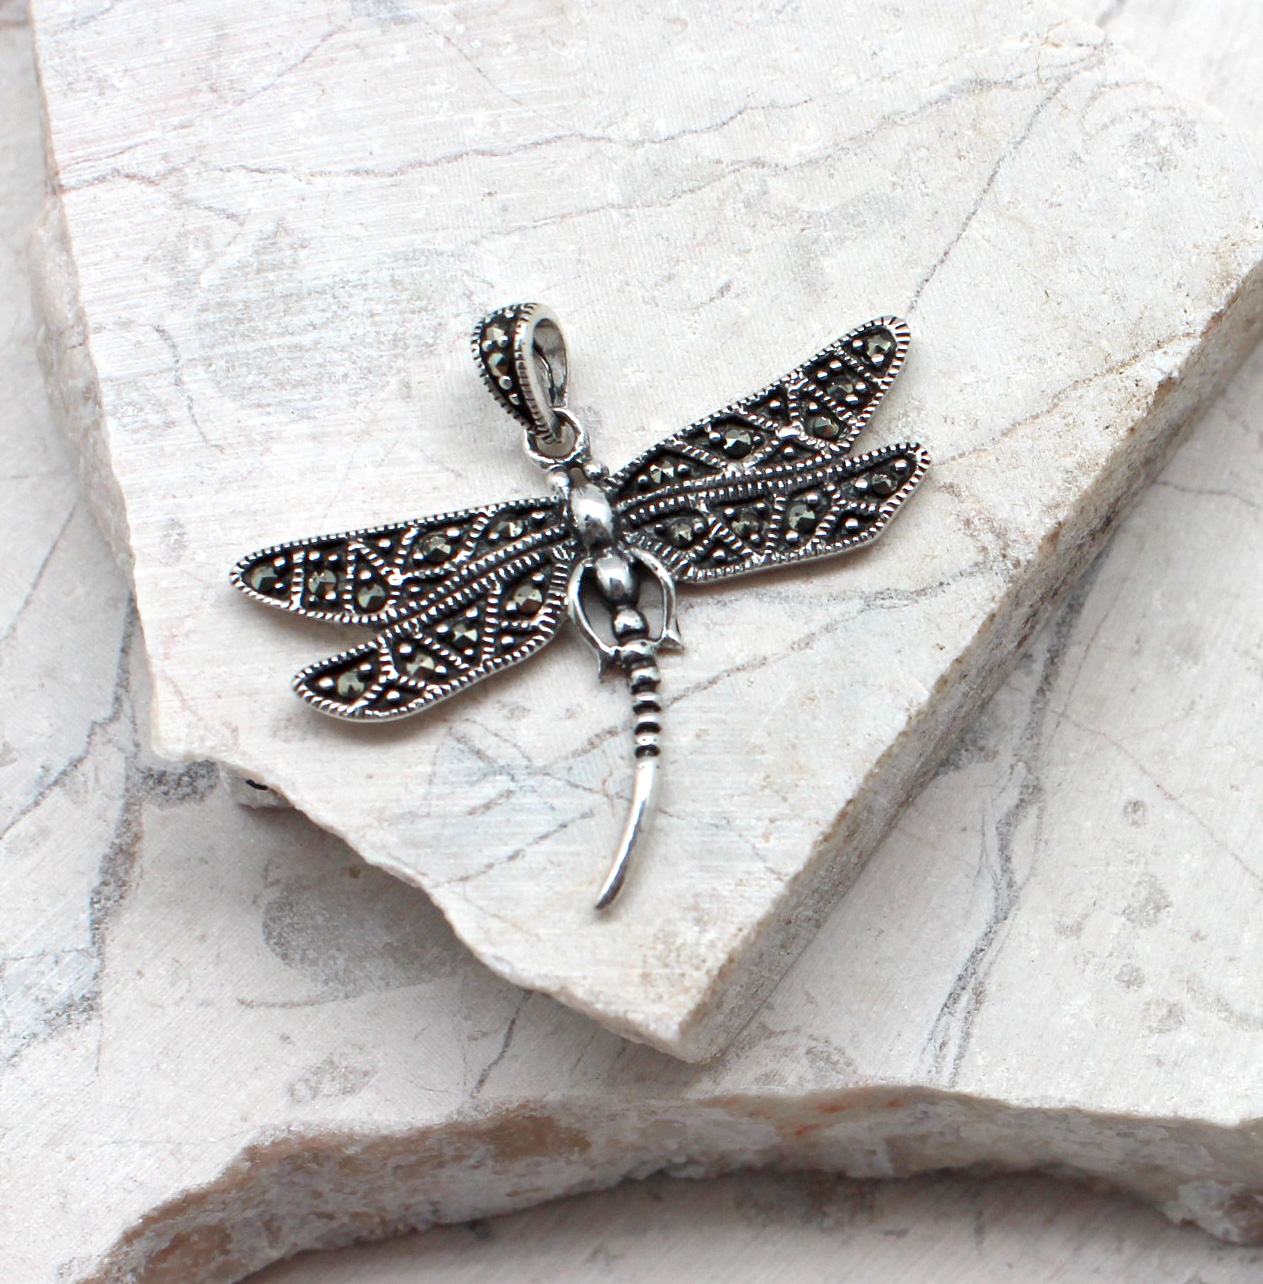 The Marcasite Dragonfly Pendant